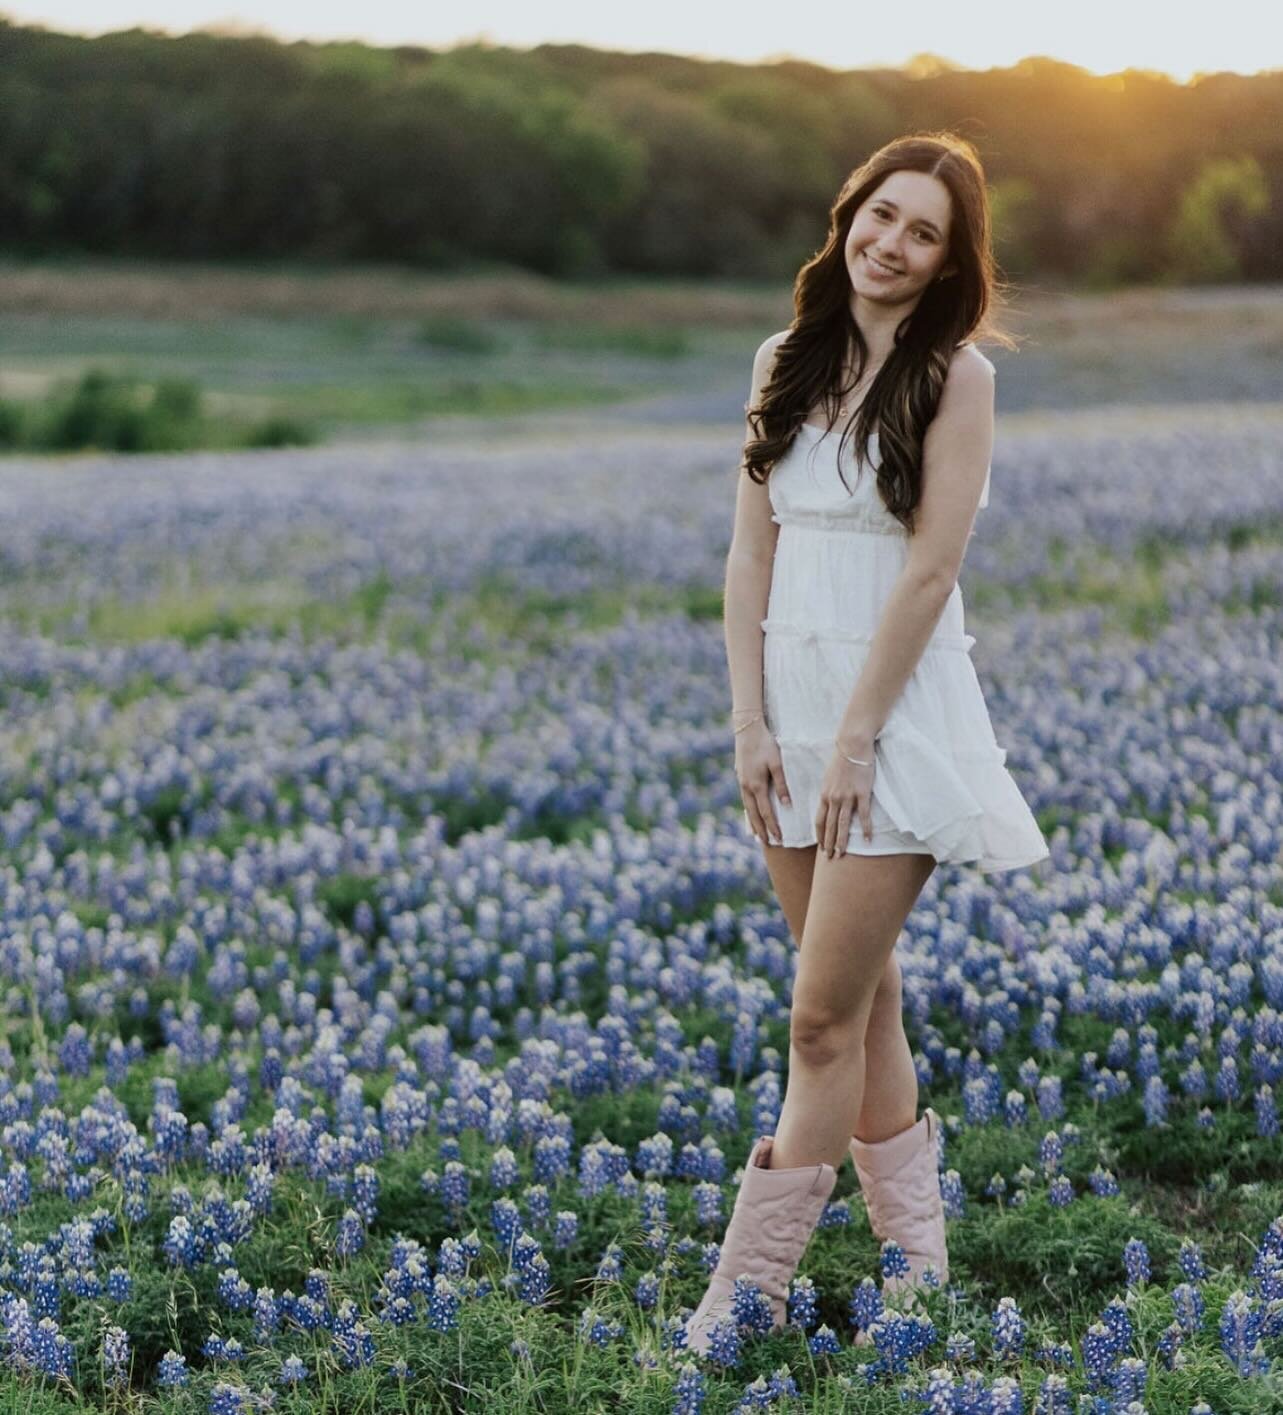 My Texas beauty in the bluebonnets!  DM me if you want a session, they won&rsquo;t last long.  I have a couple spots available! 

#BluebonnetSeason #PortraitPhotography  #TexasPhotographer#proudmom